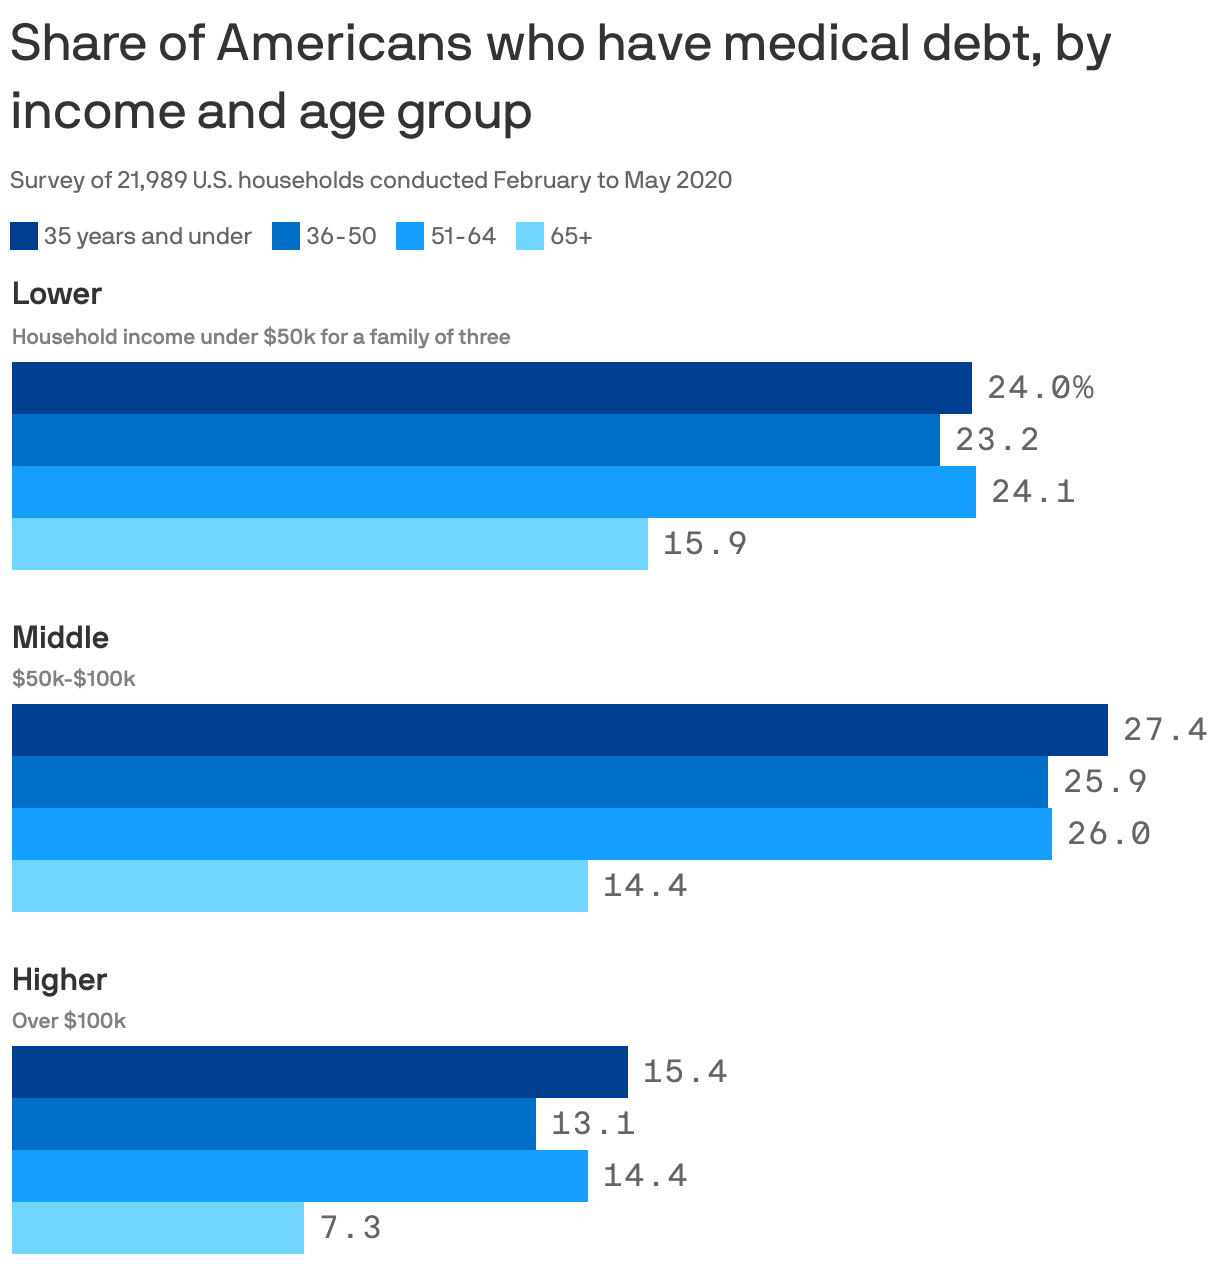 Share of Americans who have medical debt, by income and age group